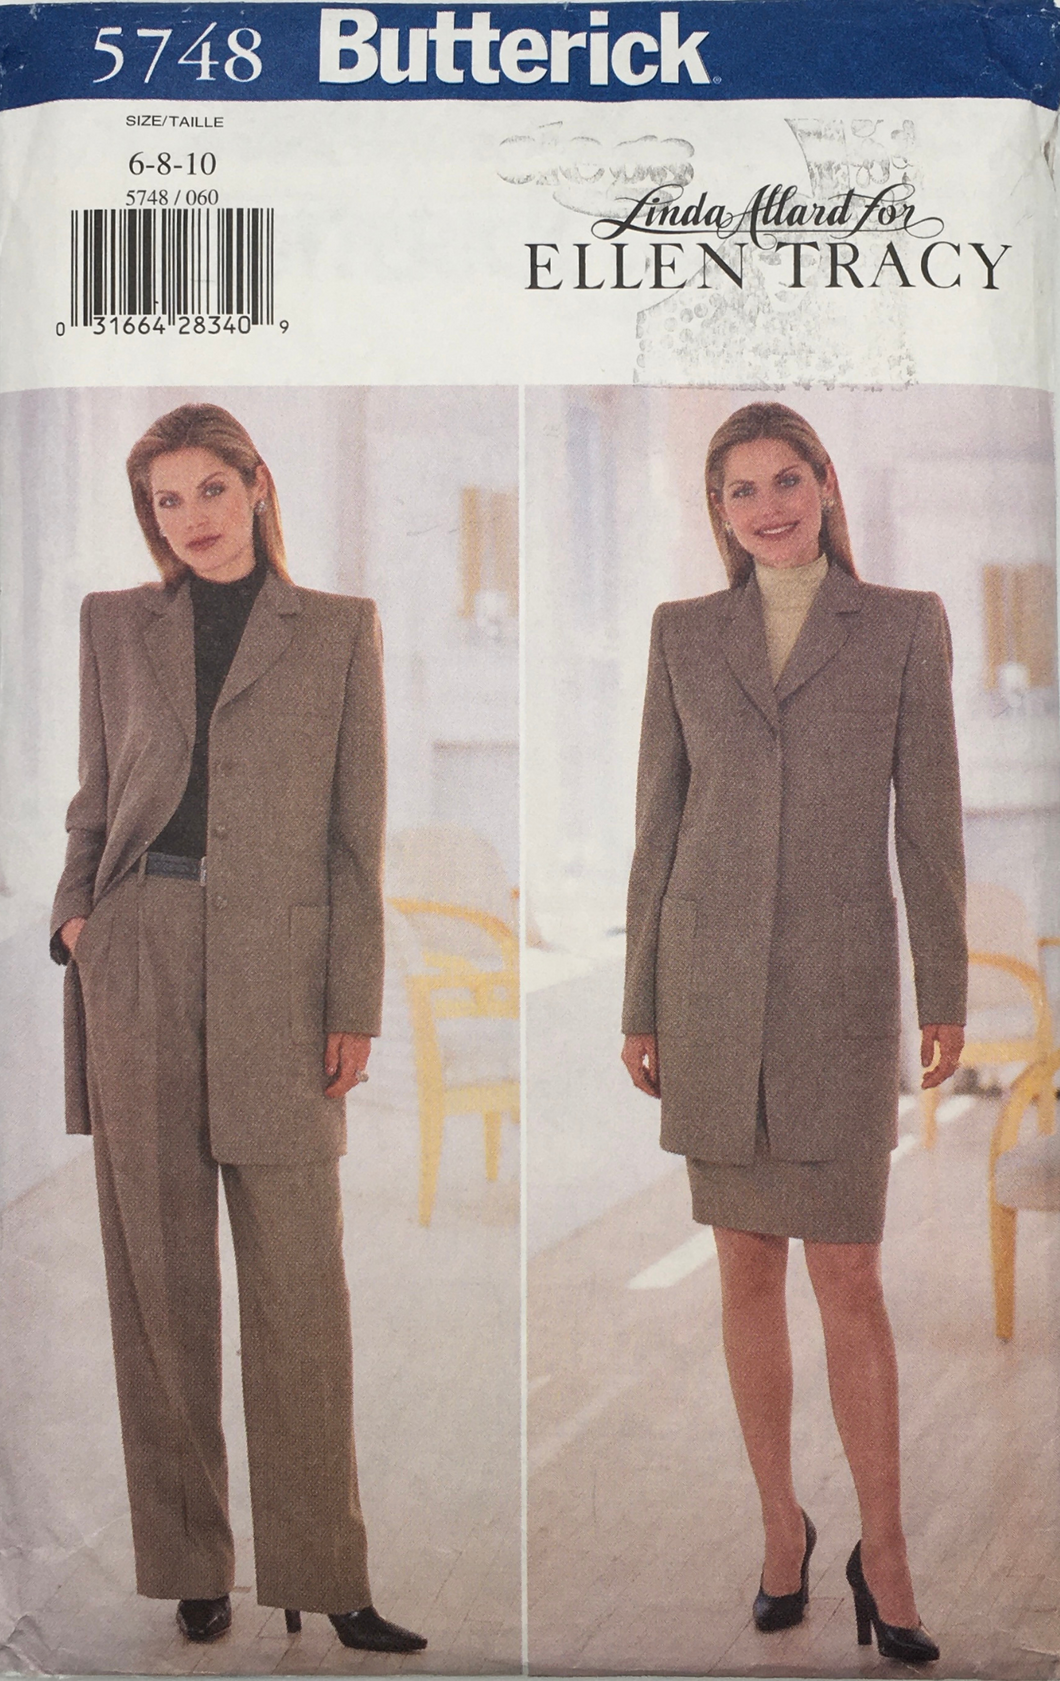 1998 Vintage Sewing Pattern: Butterick 5748